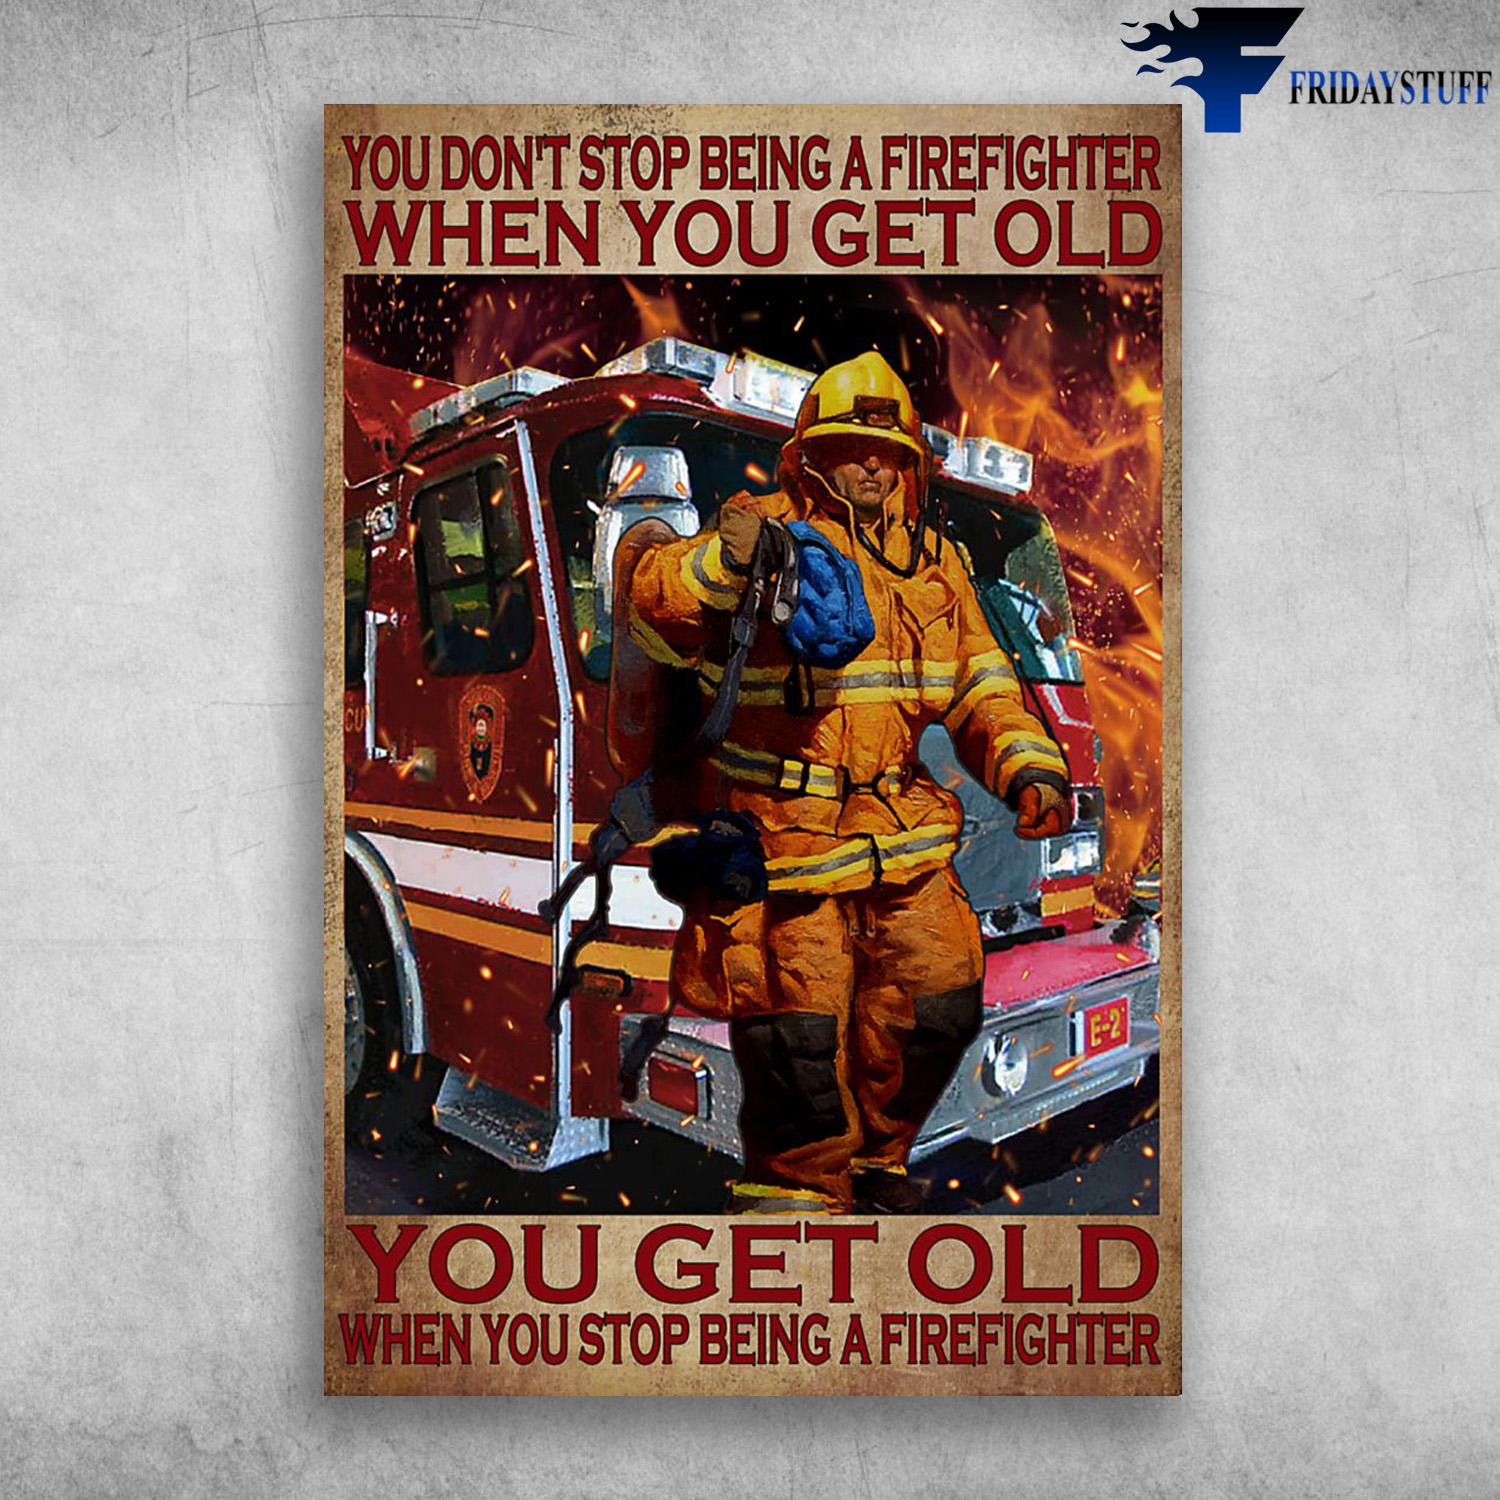 The Firefighter - You Don’t Stop Being A Firefighter When You Get Old, You Get Old When You Stop Being A Firefighter